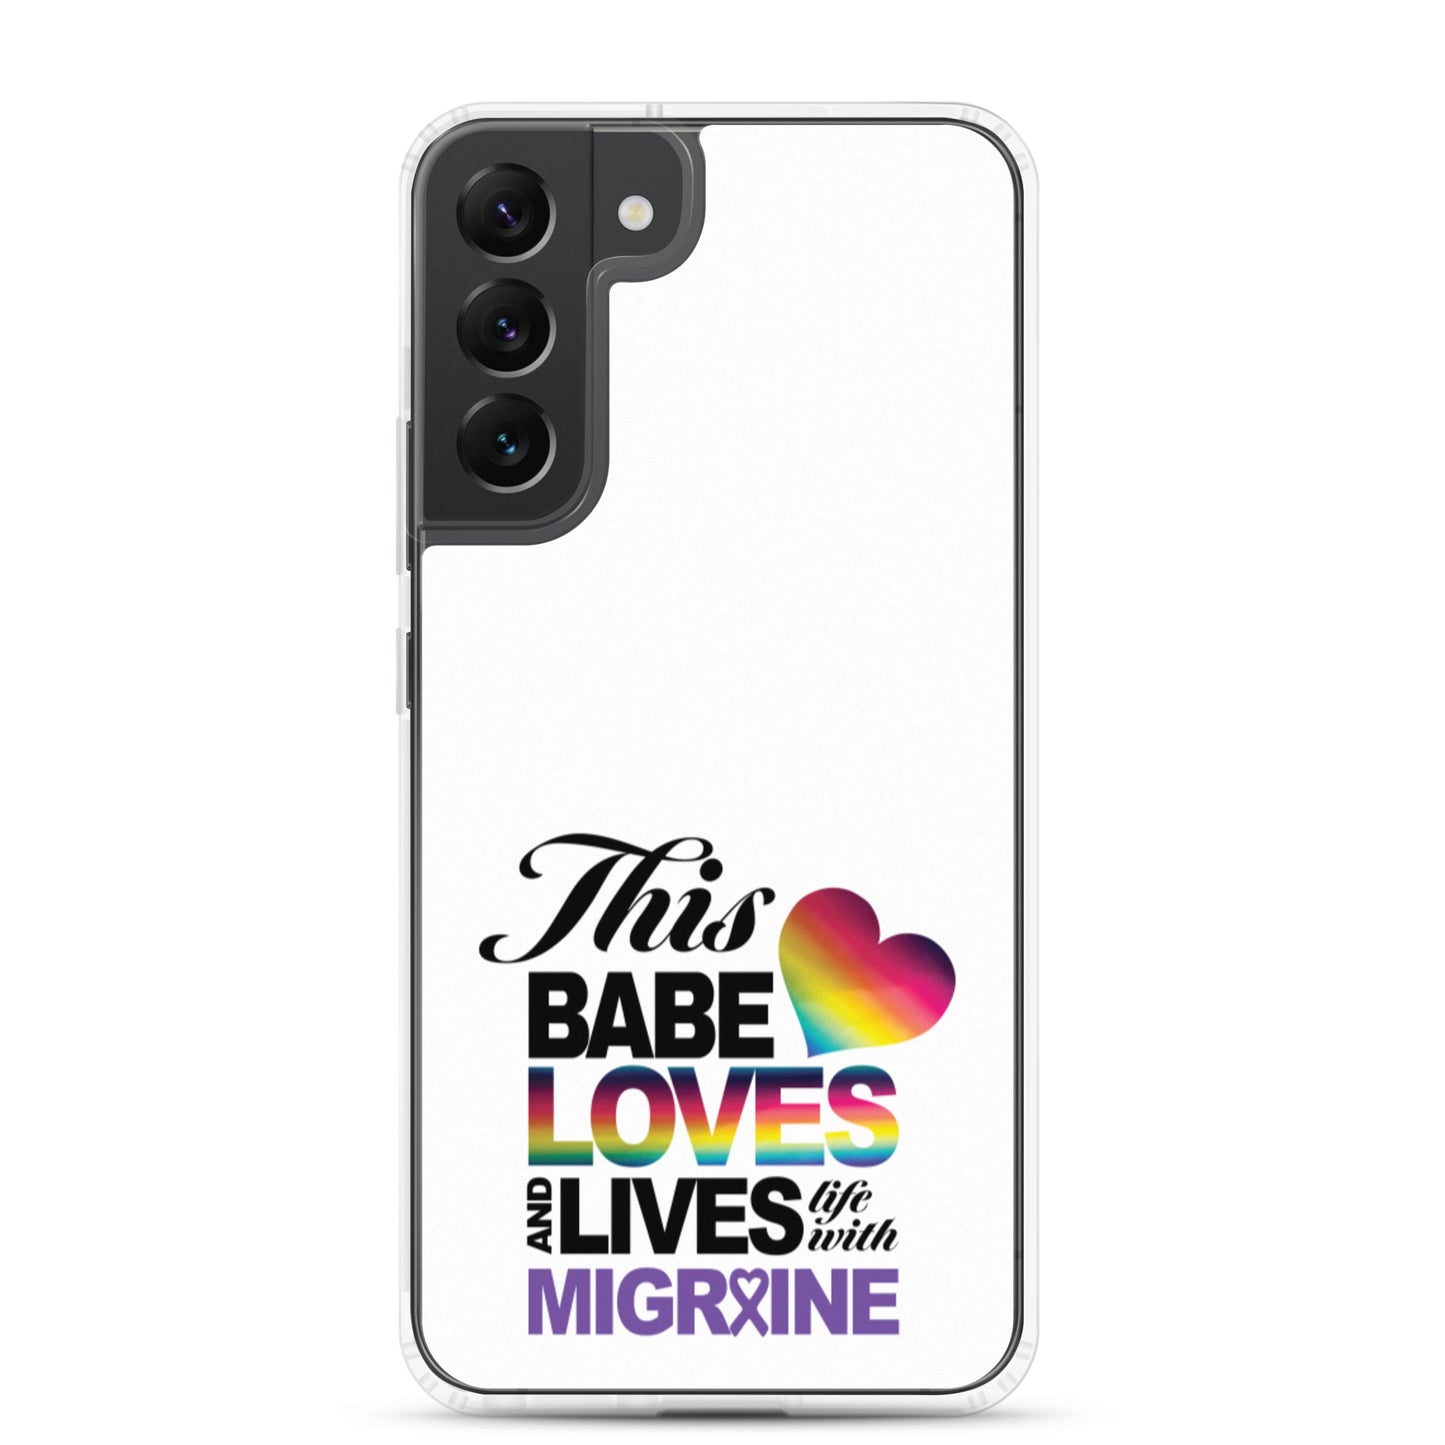 This Babe Loves & Lives Life Samsung Case